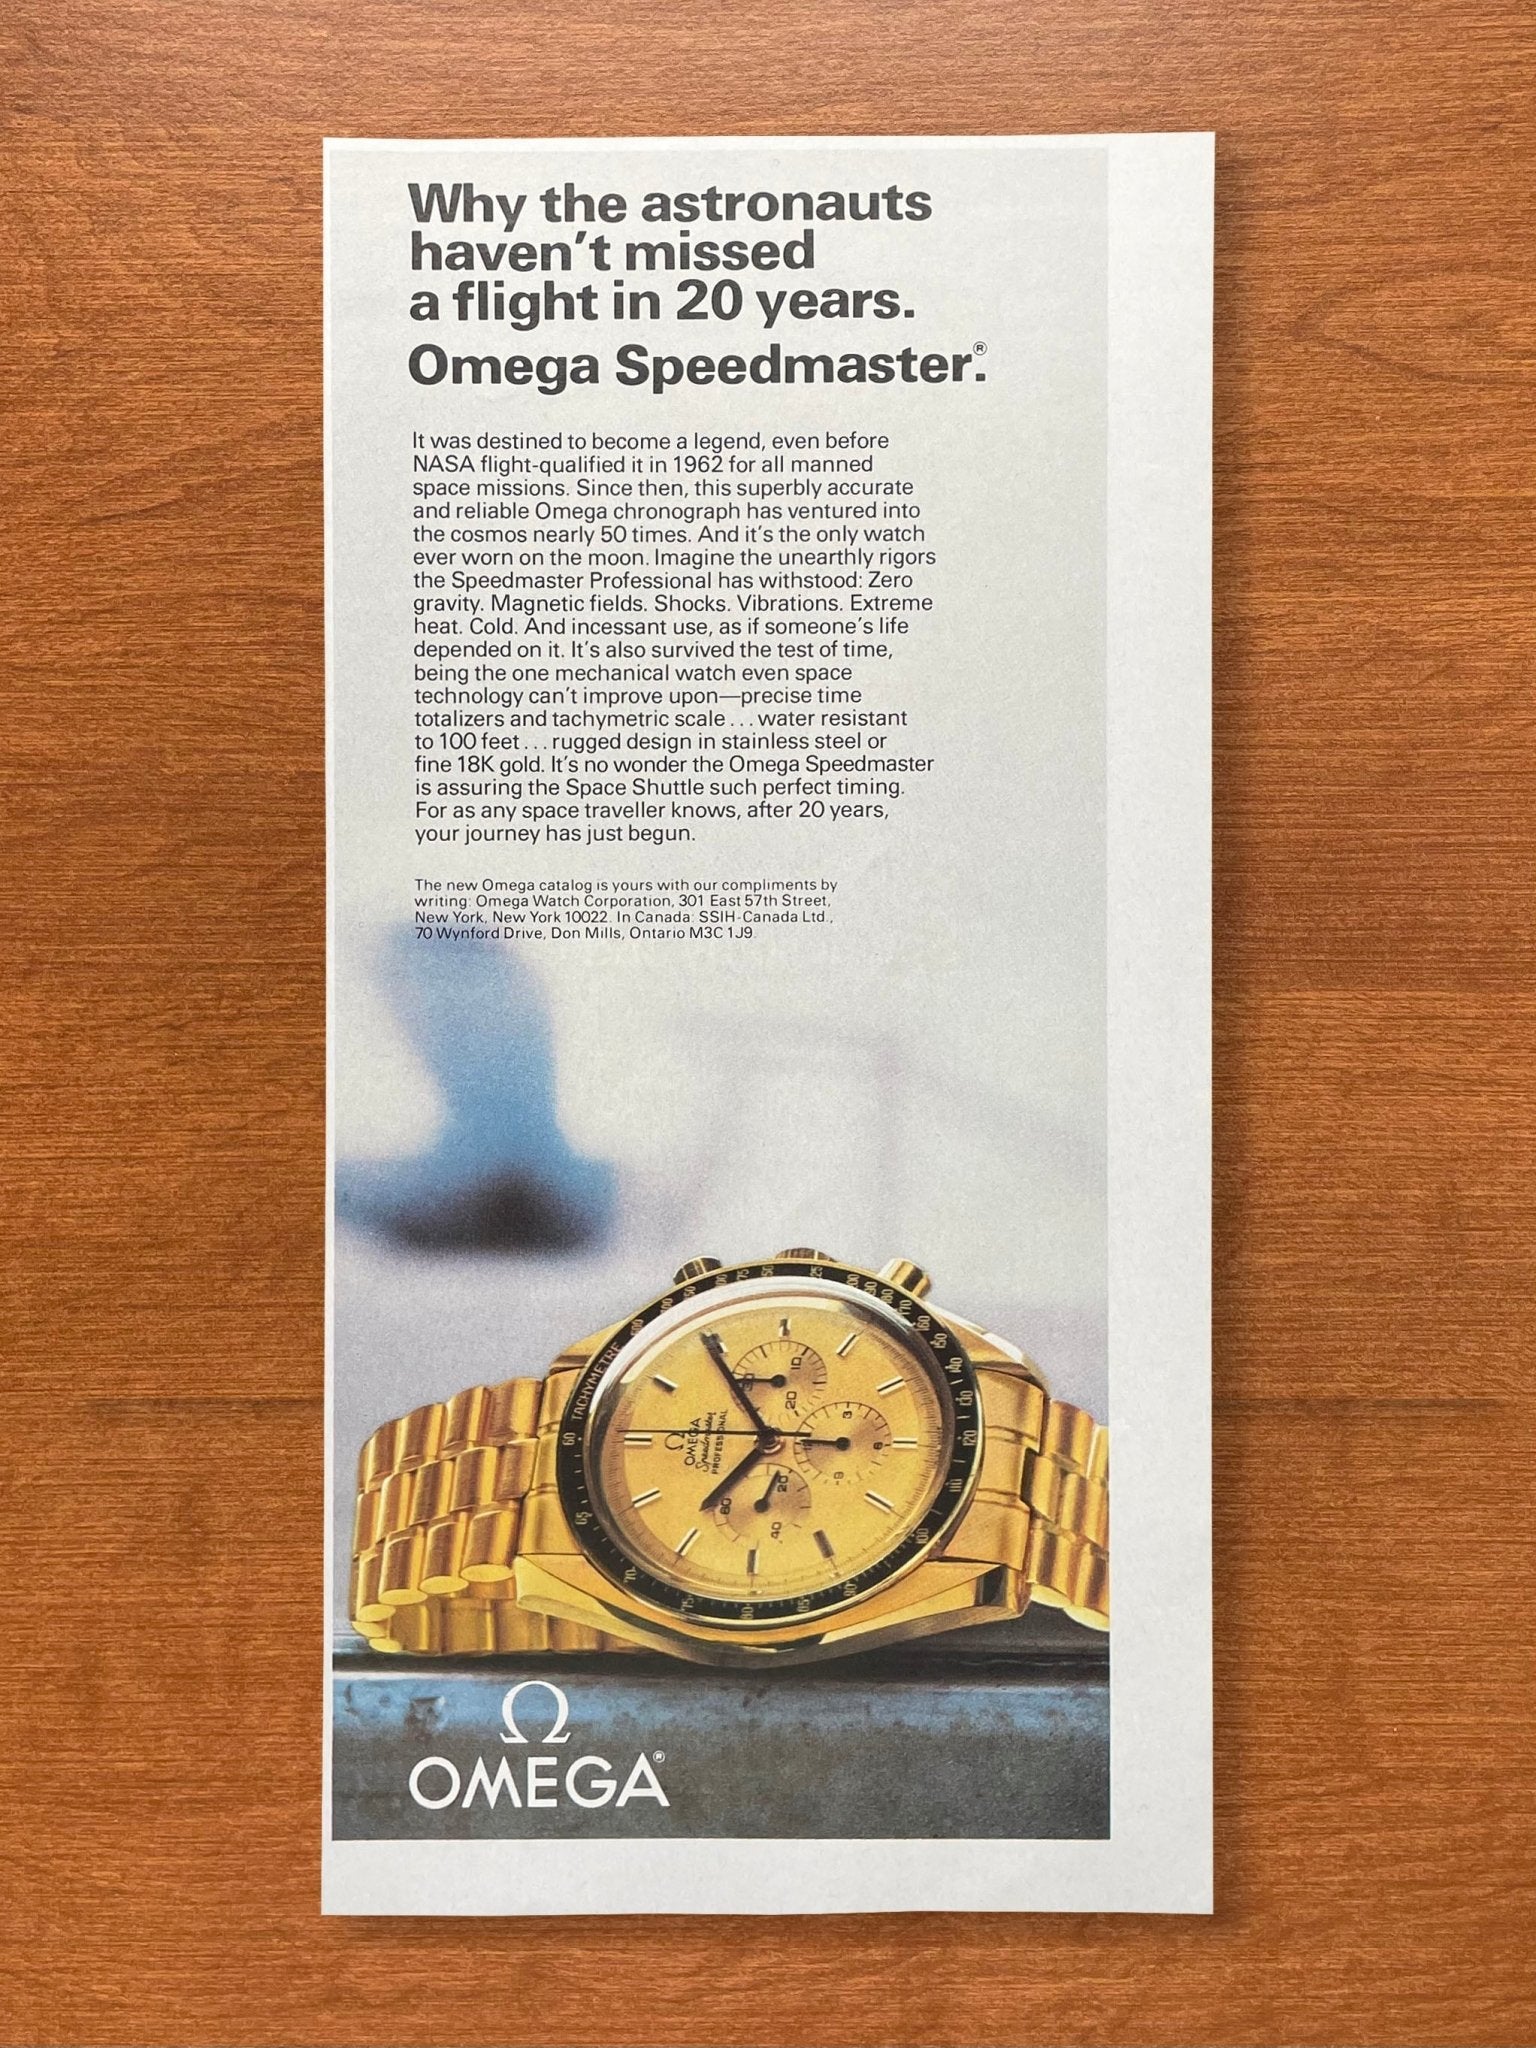 1981 Omega Speedmaster "haven't missed a flight in 20 years." Advertisement